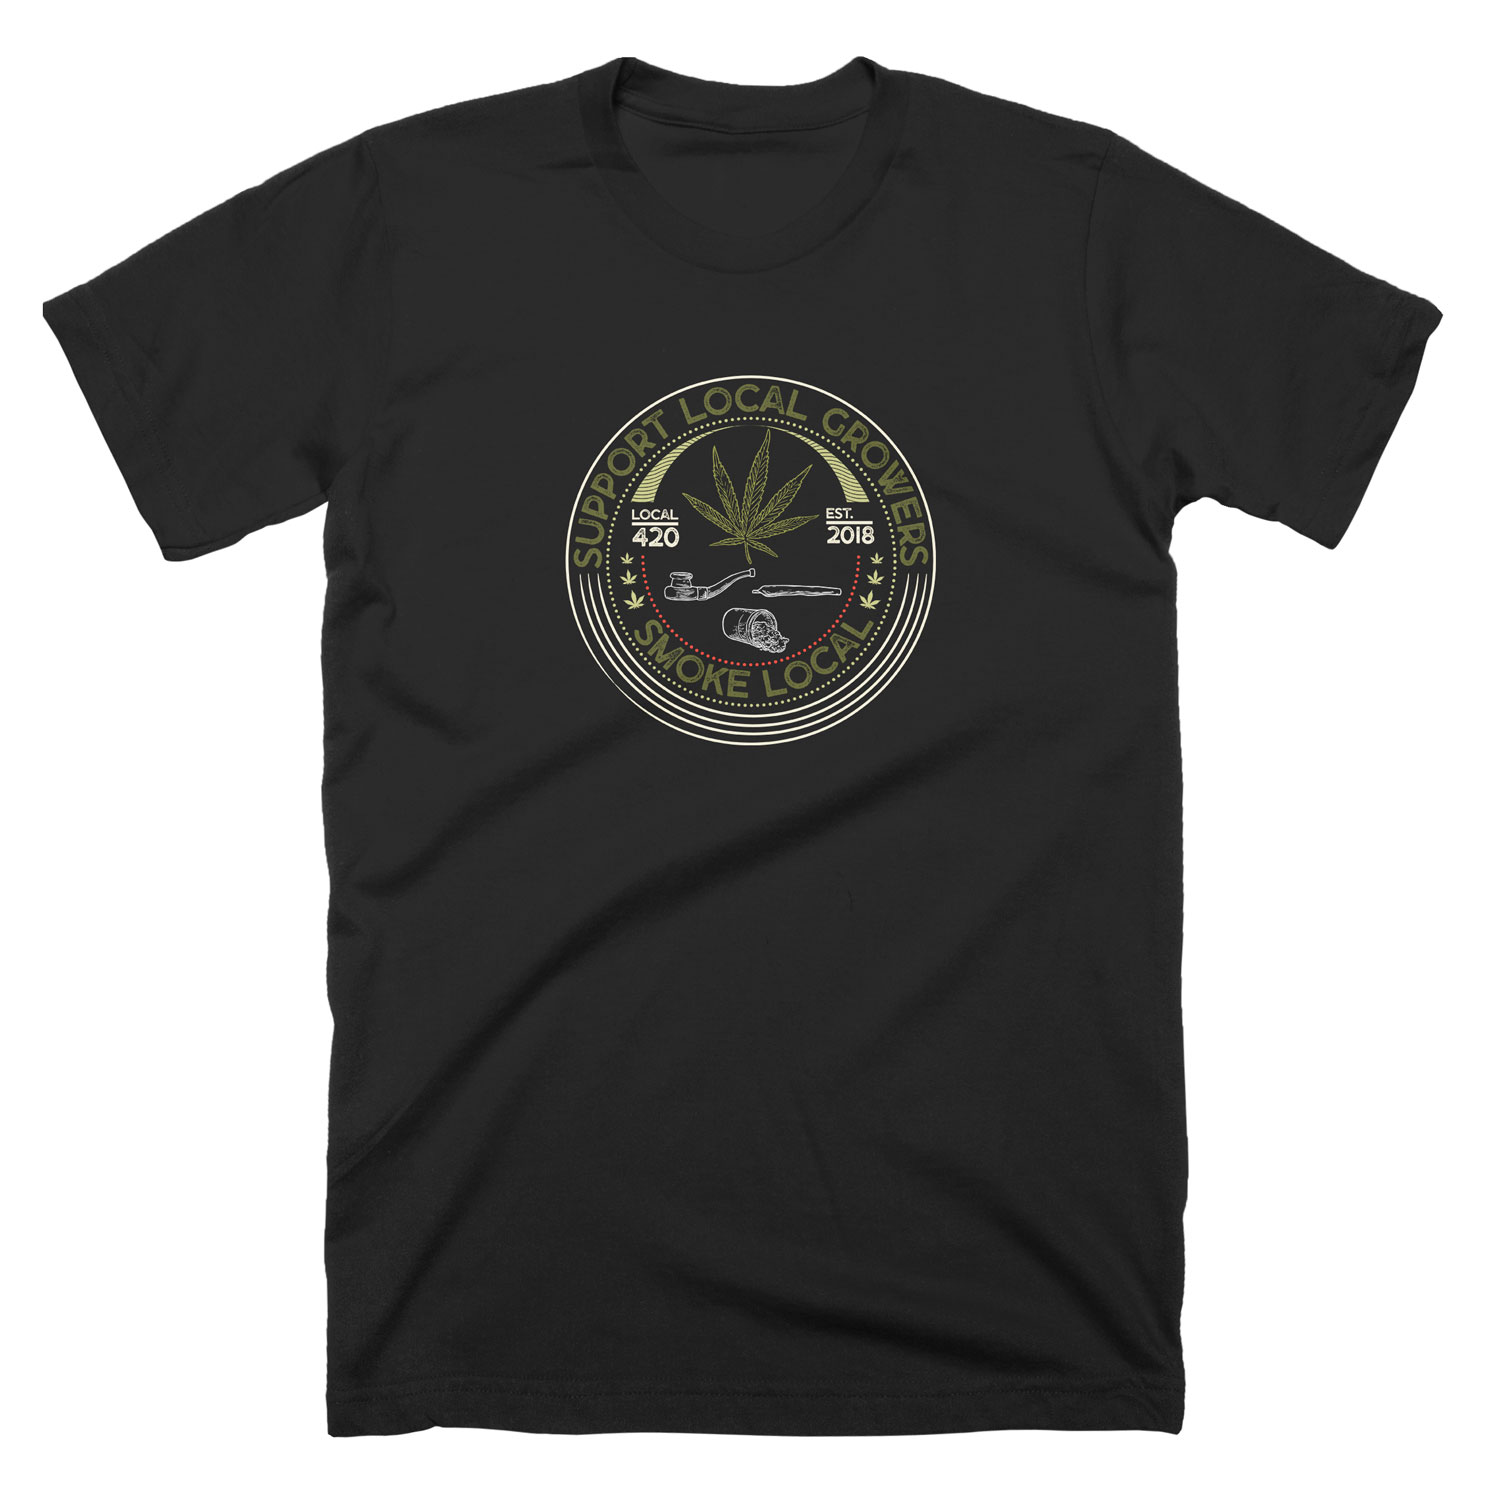 Support Local Growers T-shirt